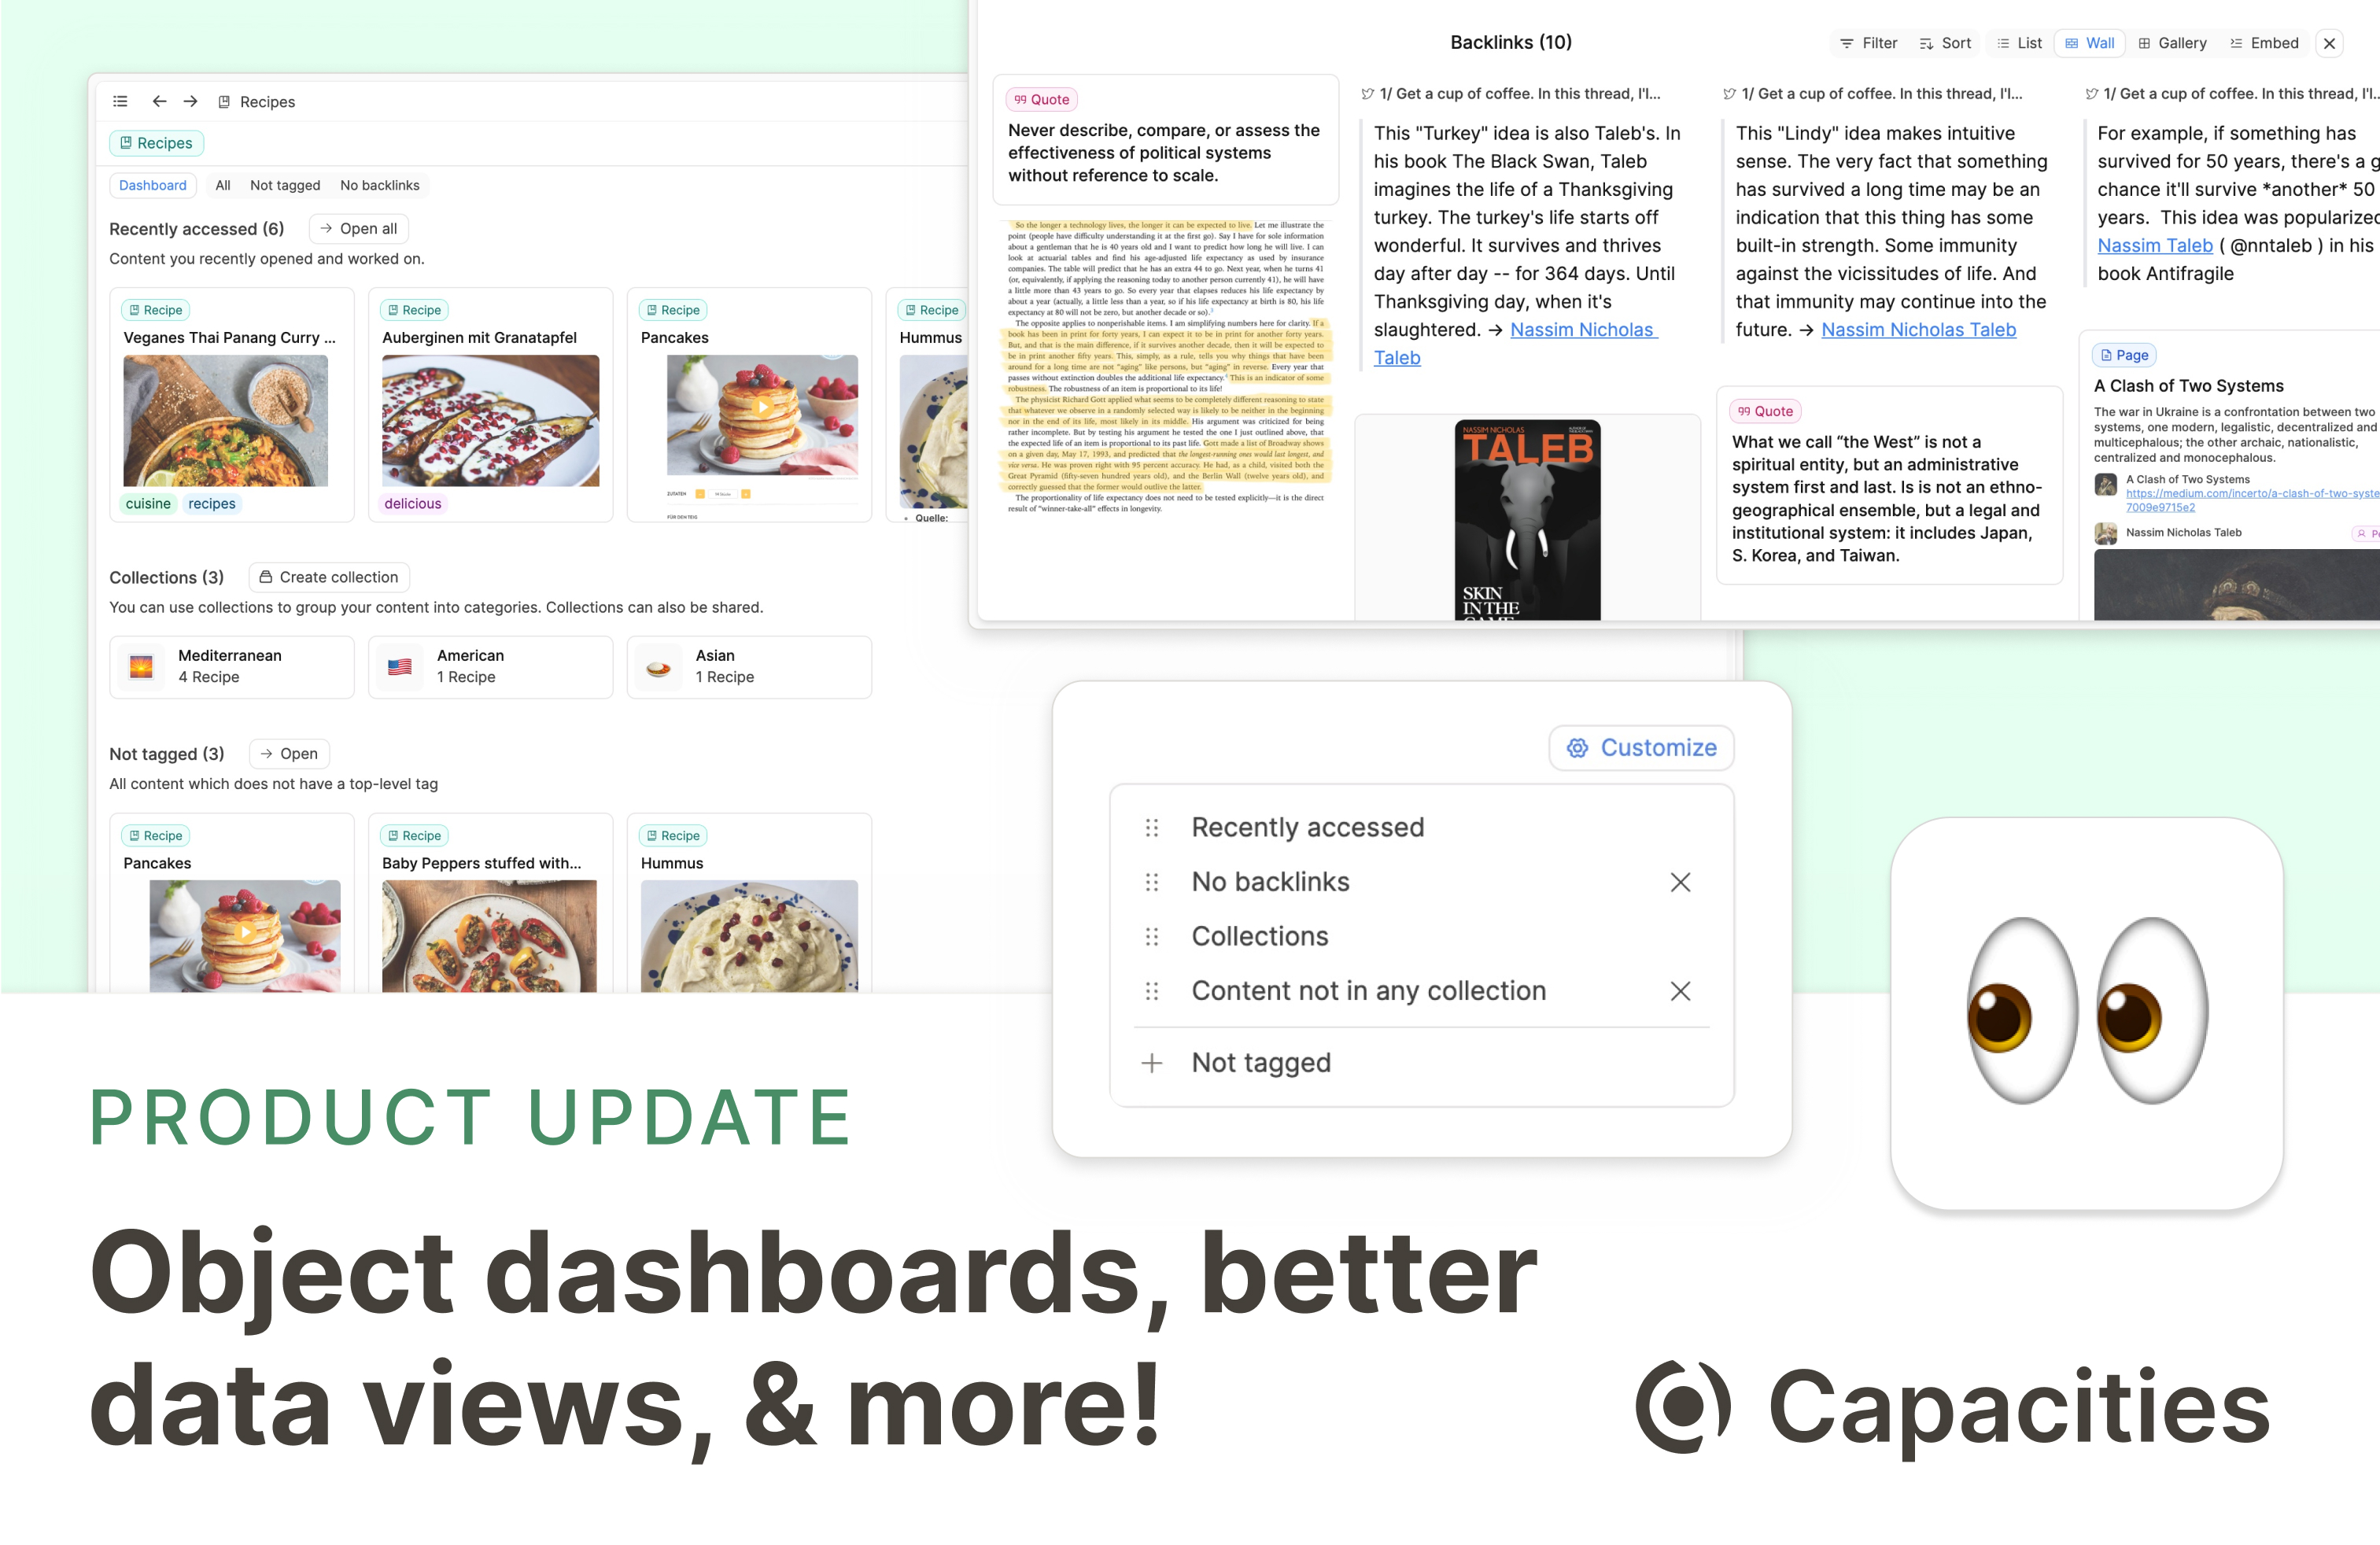 Object dashboards, better data views, & more!